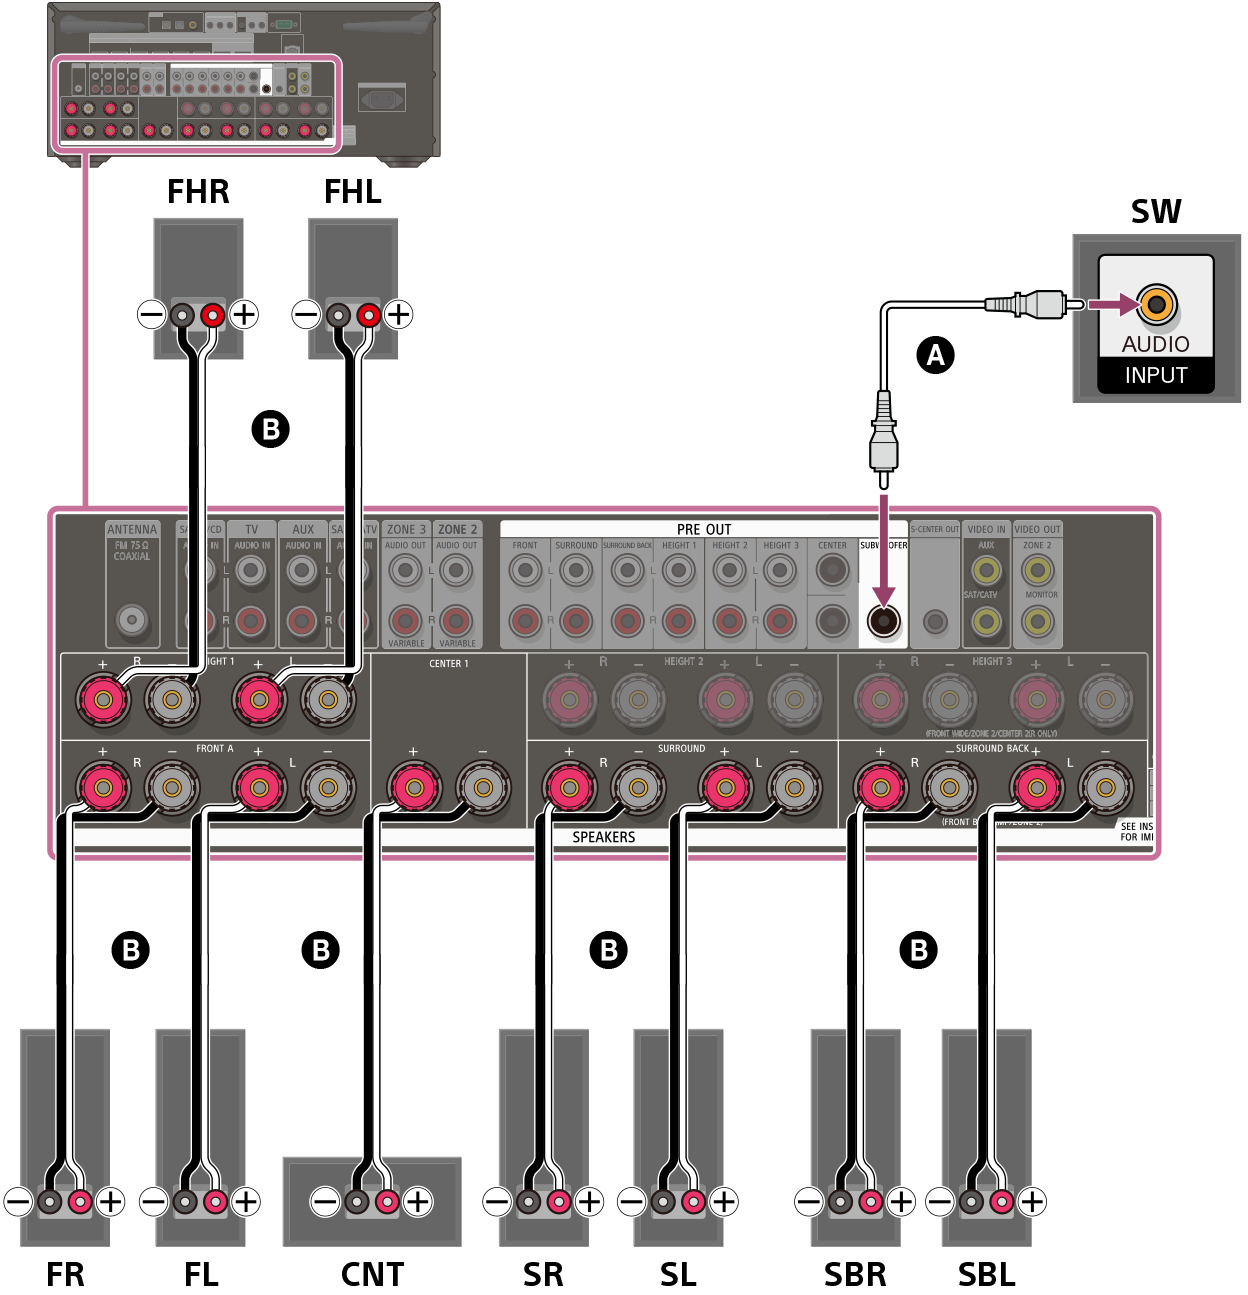 Illustration of connecting each speaker to the speaker terminals on the rear of the receiver. Connect the left and right front speakers, left and right surround speakers, center speaker, left and right surround back speakers, and left and right front high speakers to their respective speaker terminals using speaker cables (not supplied). Connect the subwoofer to the SUBWOOFER OUT terminal with a monaural audio cable (not supplied).